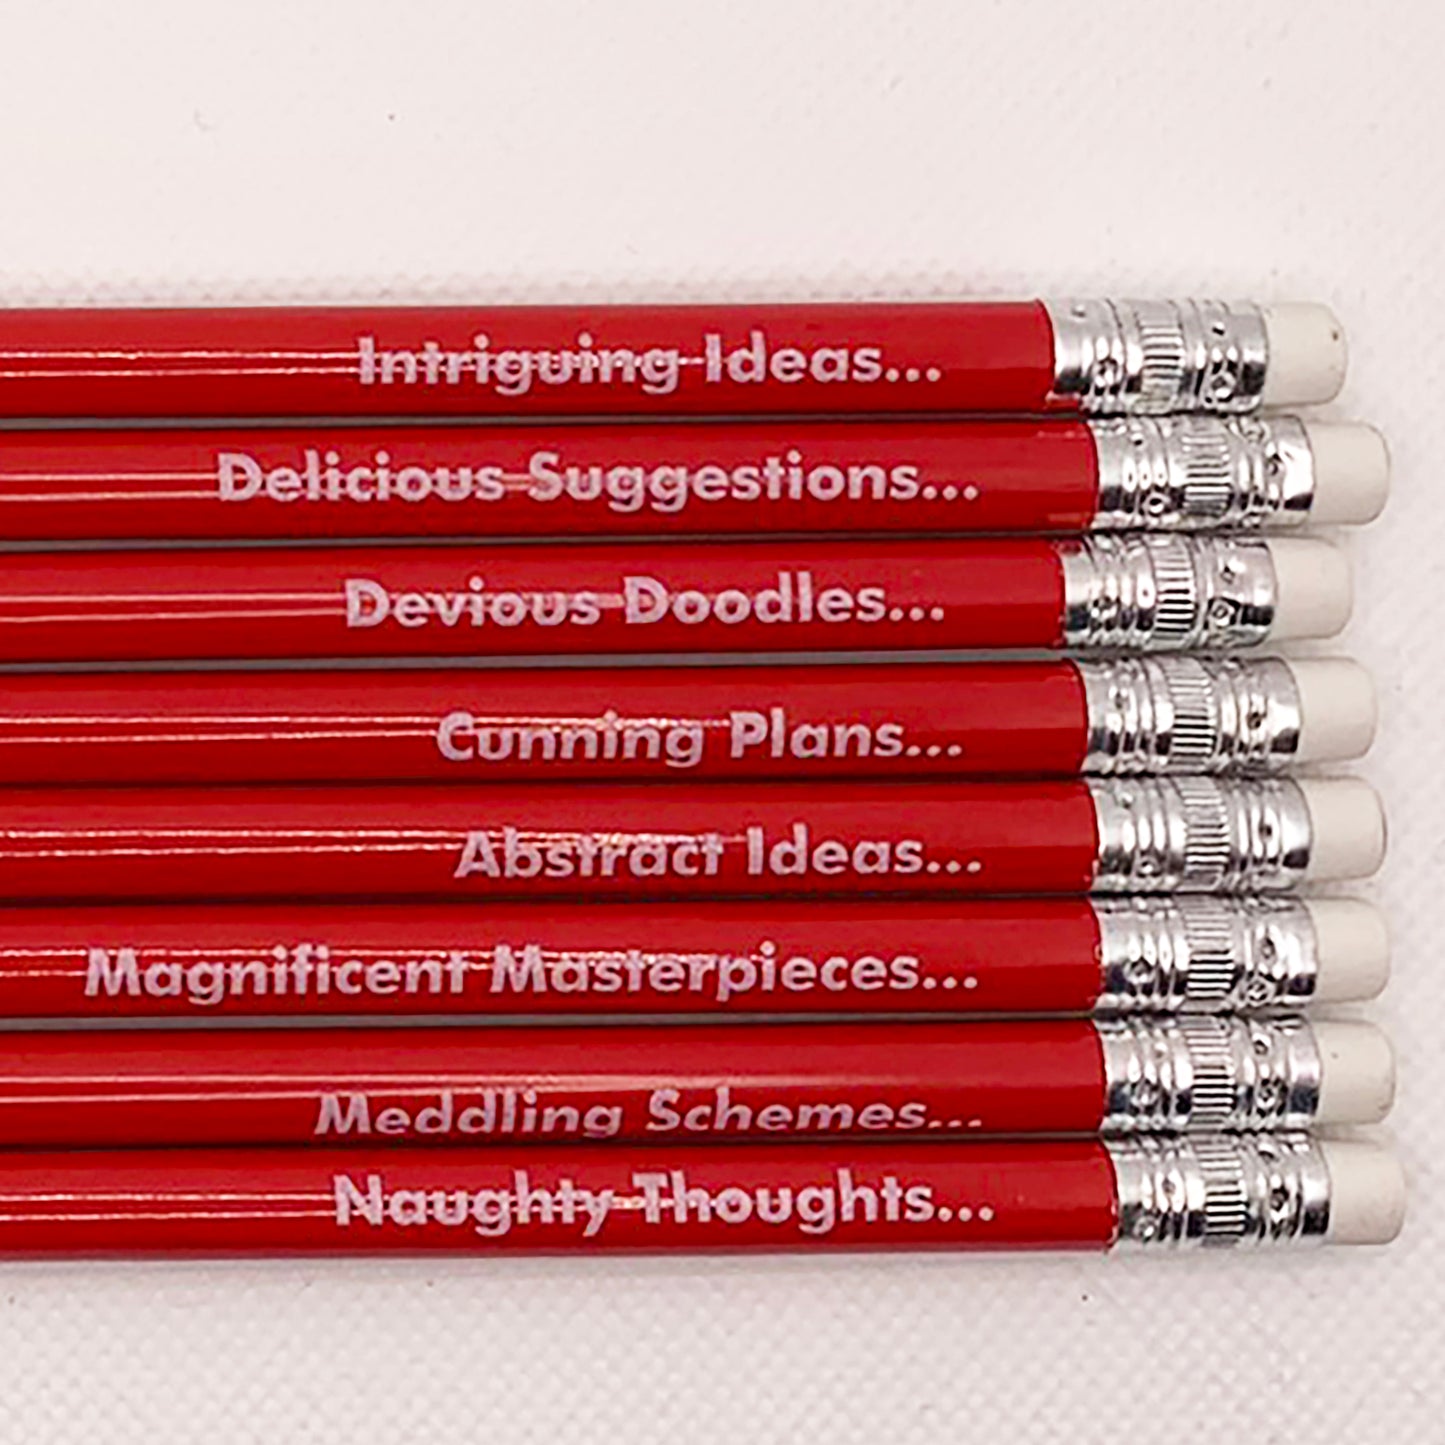 Number Ninety Five, Pencils for Plotting, 8 sharpened red pencils with white rubber tips, with phases such as, Magnificent Masterpieces, Abstract Ideas, Cunning Plans and Delicious Suggestions written on them in white text.